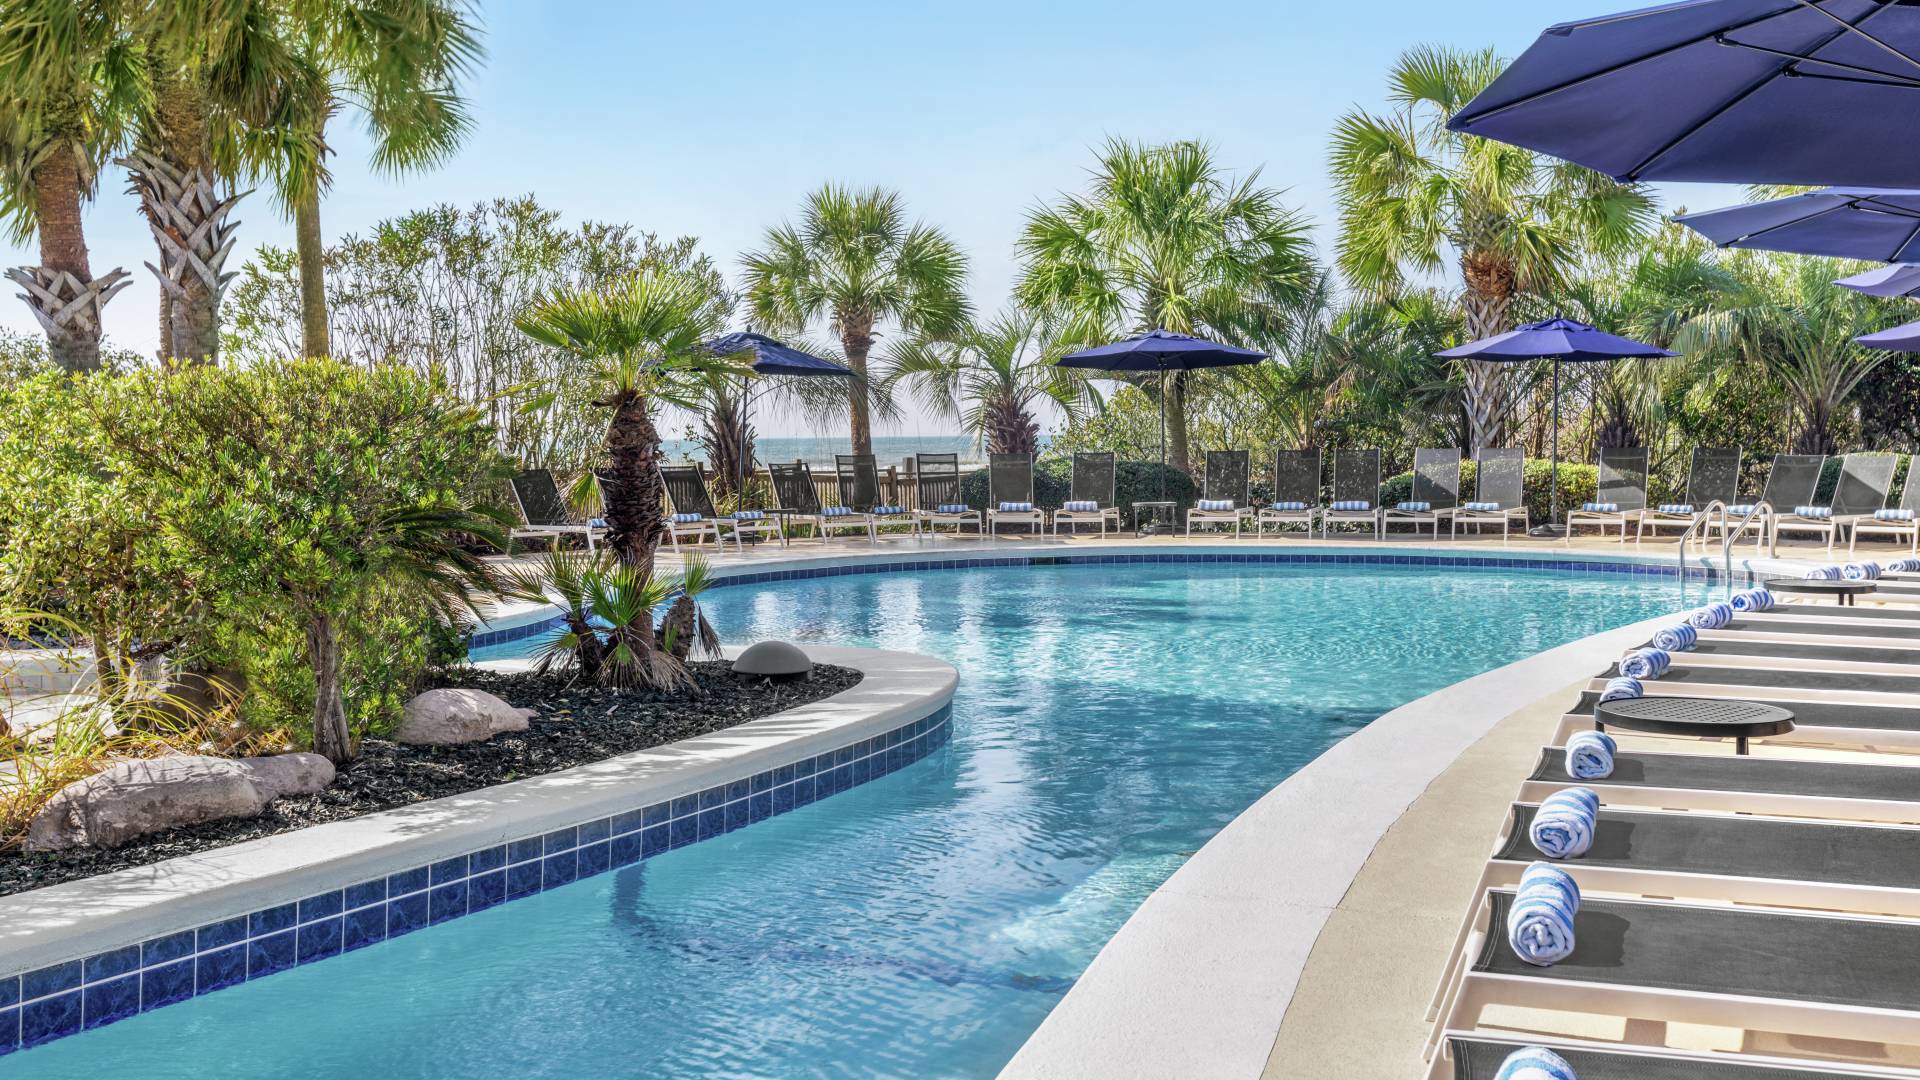 Beautiful outdoor pool featuring ample seating for guests to relax and ocean view.-transition